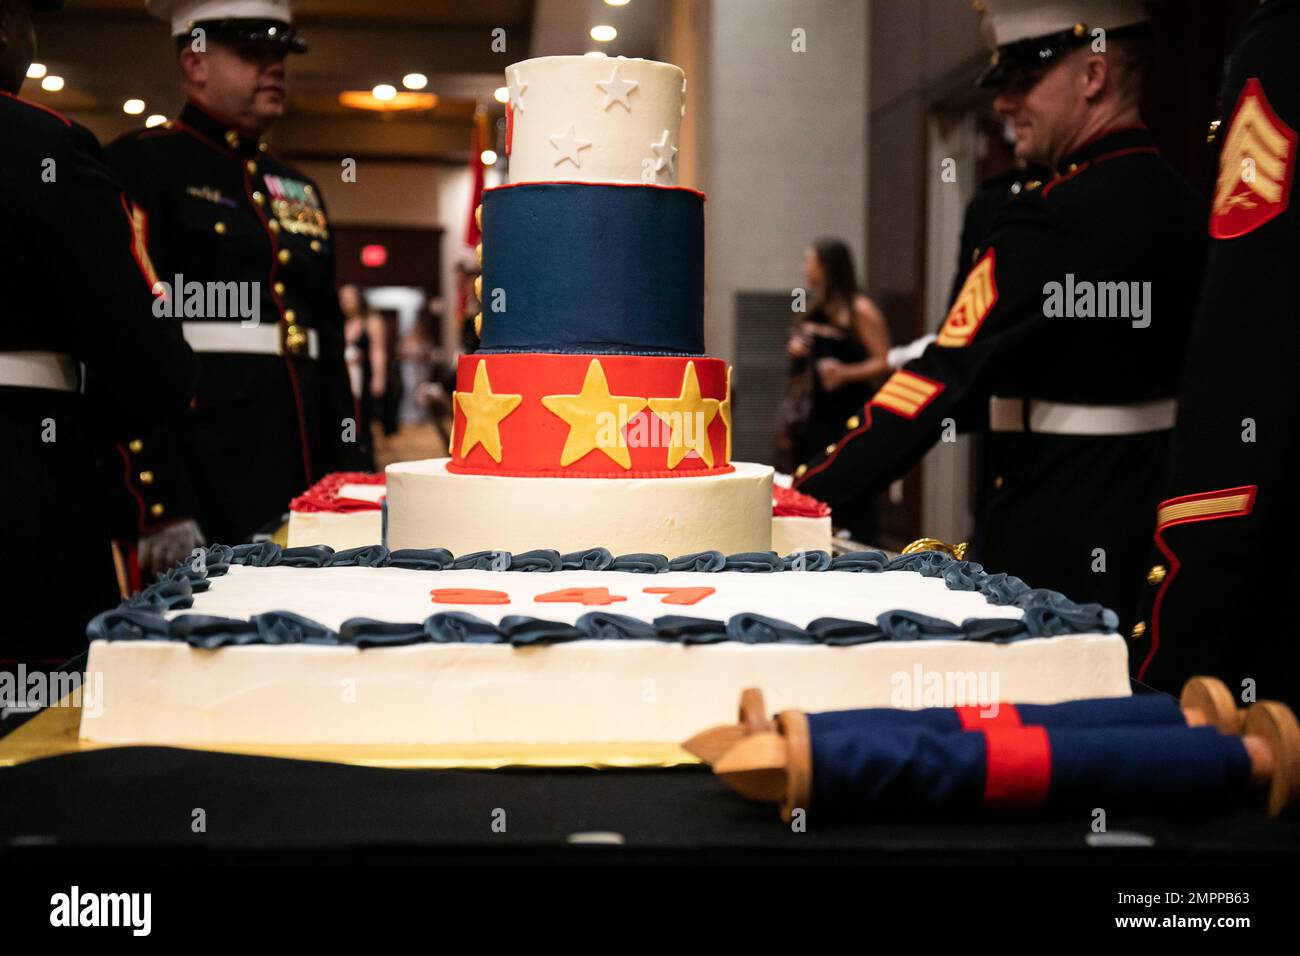 The official cake of Recruiting Station Dallas is displayed as guests take their seats at the 247th Marine Corps Birthday Ball held in Allen, Tx on Nov. 11, 2022. Since 1921, the Corps has celebrated their birthday and honored the legacy of the U.S. Marine Corps at the Marine Corps Ball. November 10 is the official birthday of the Marine Corps. Stock Photo